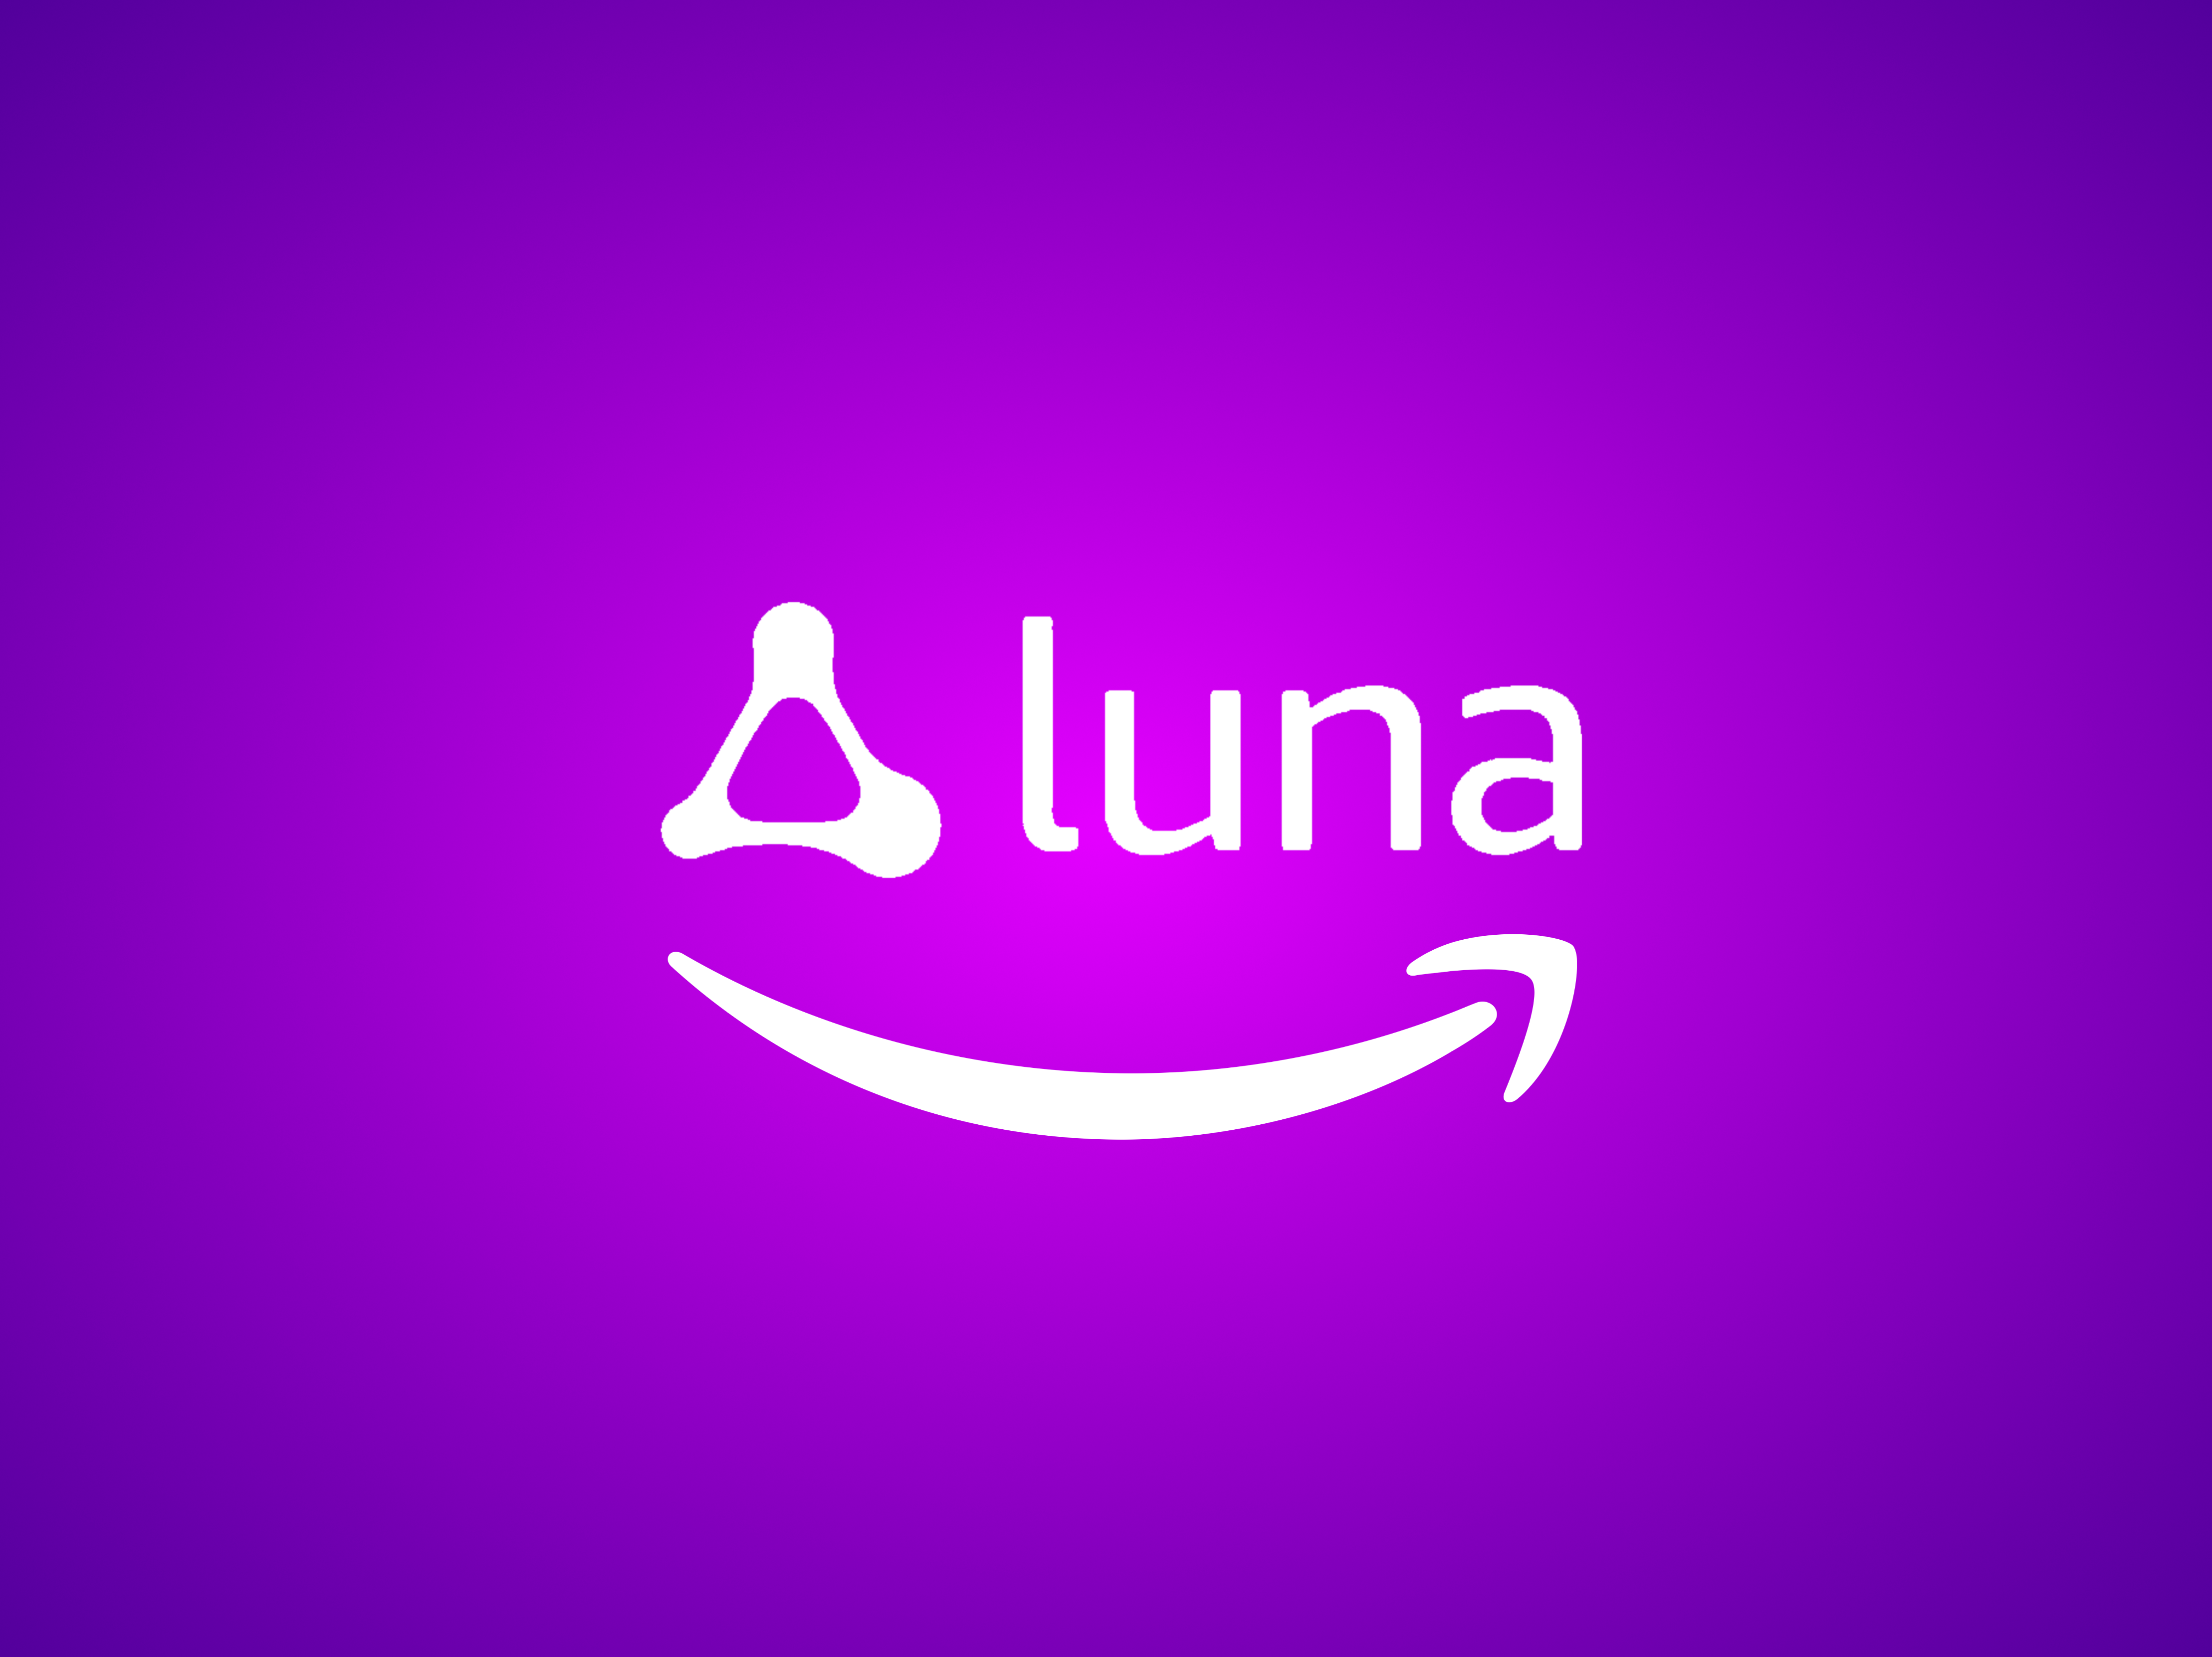 How to get free 7-day access to Amazon’s Luna cloud gaming service on Prime Day